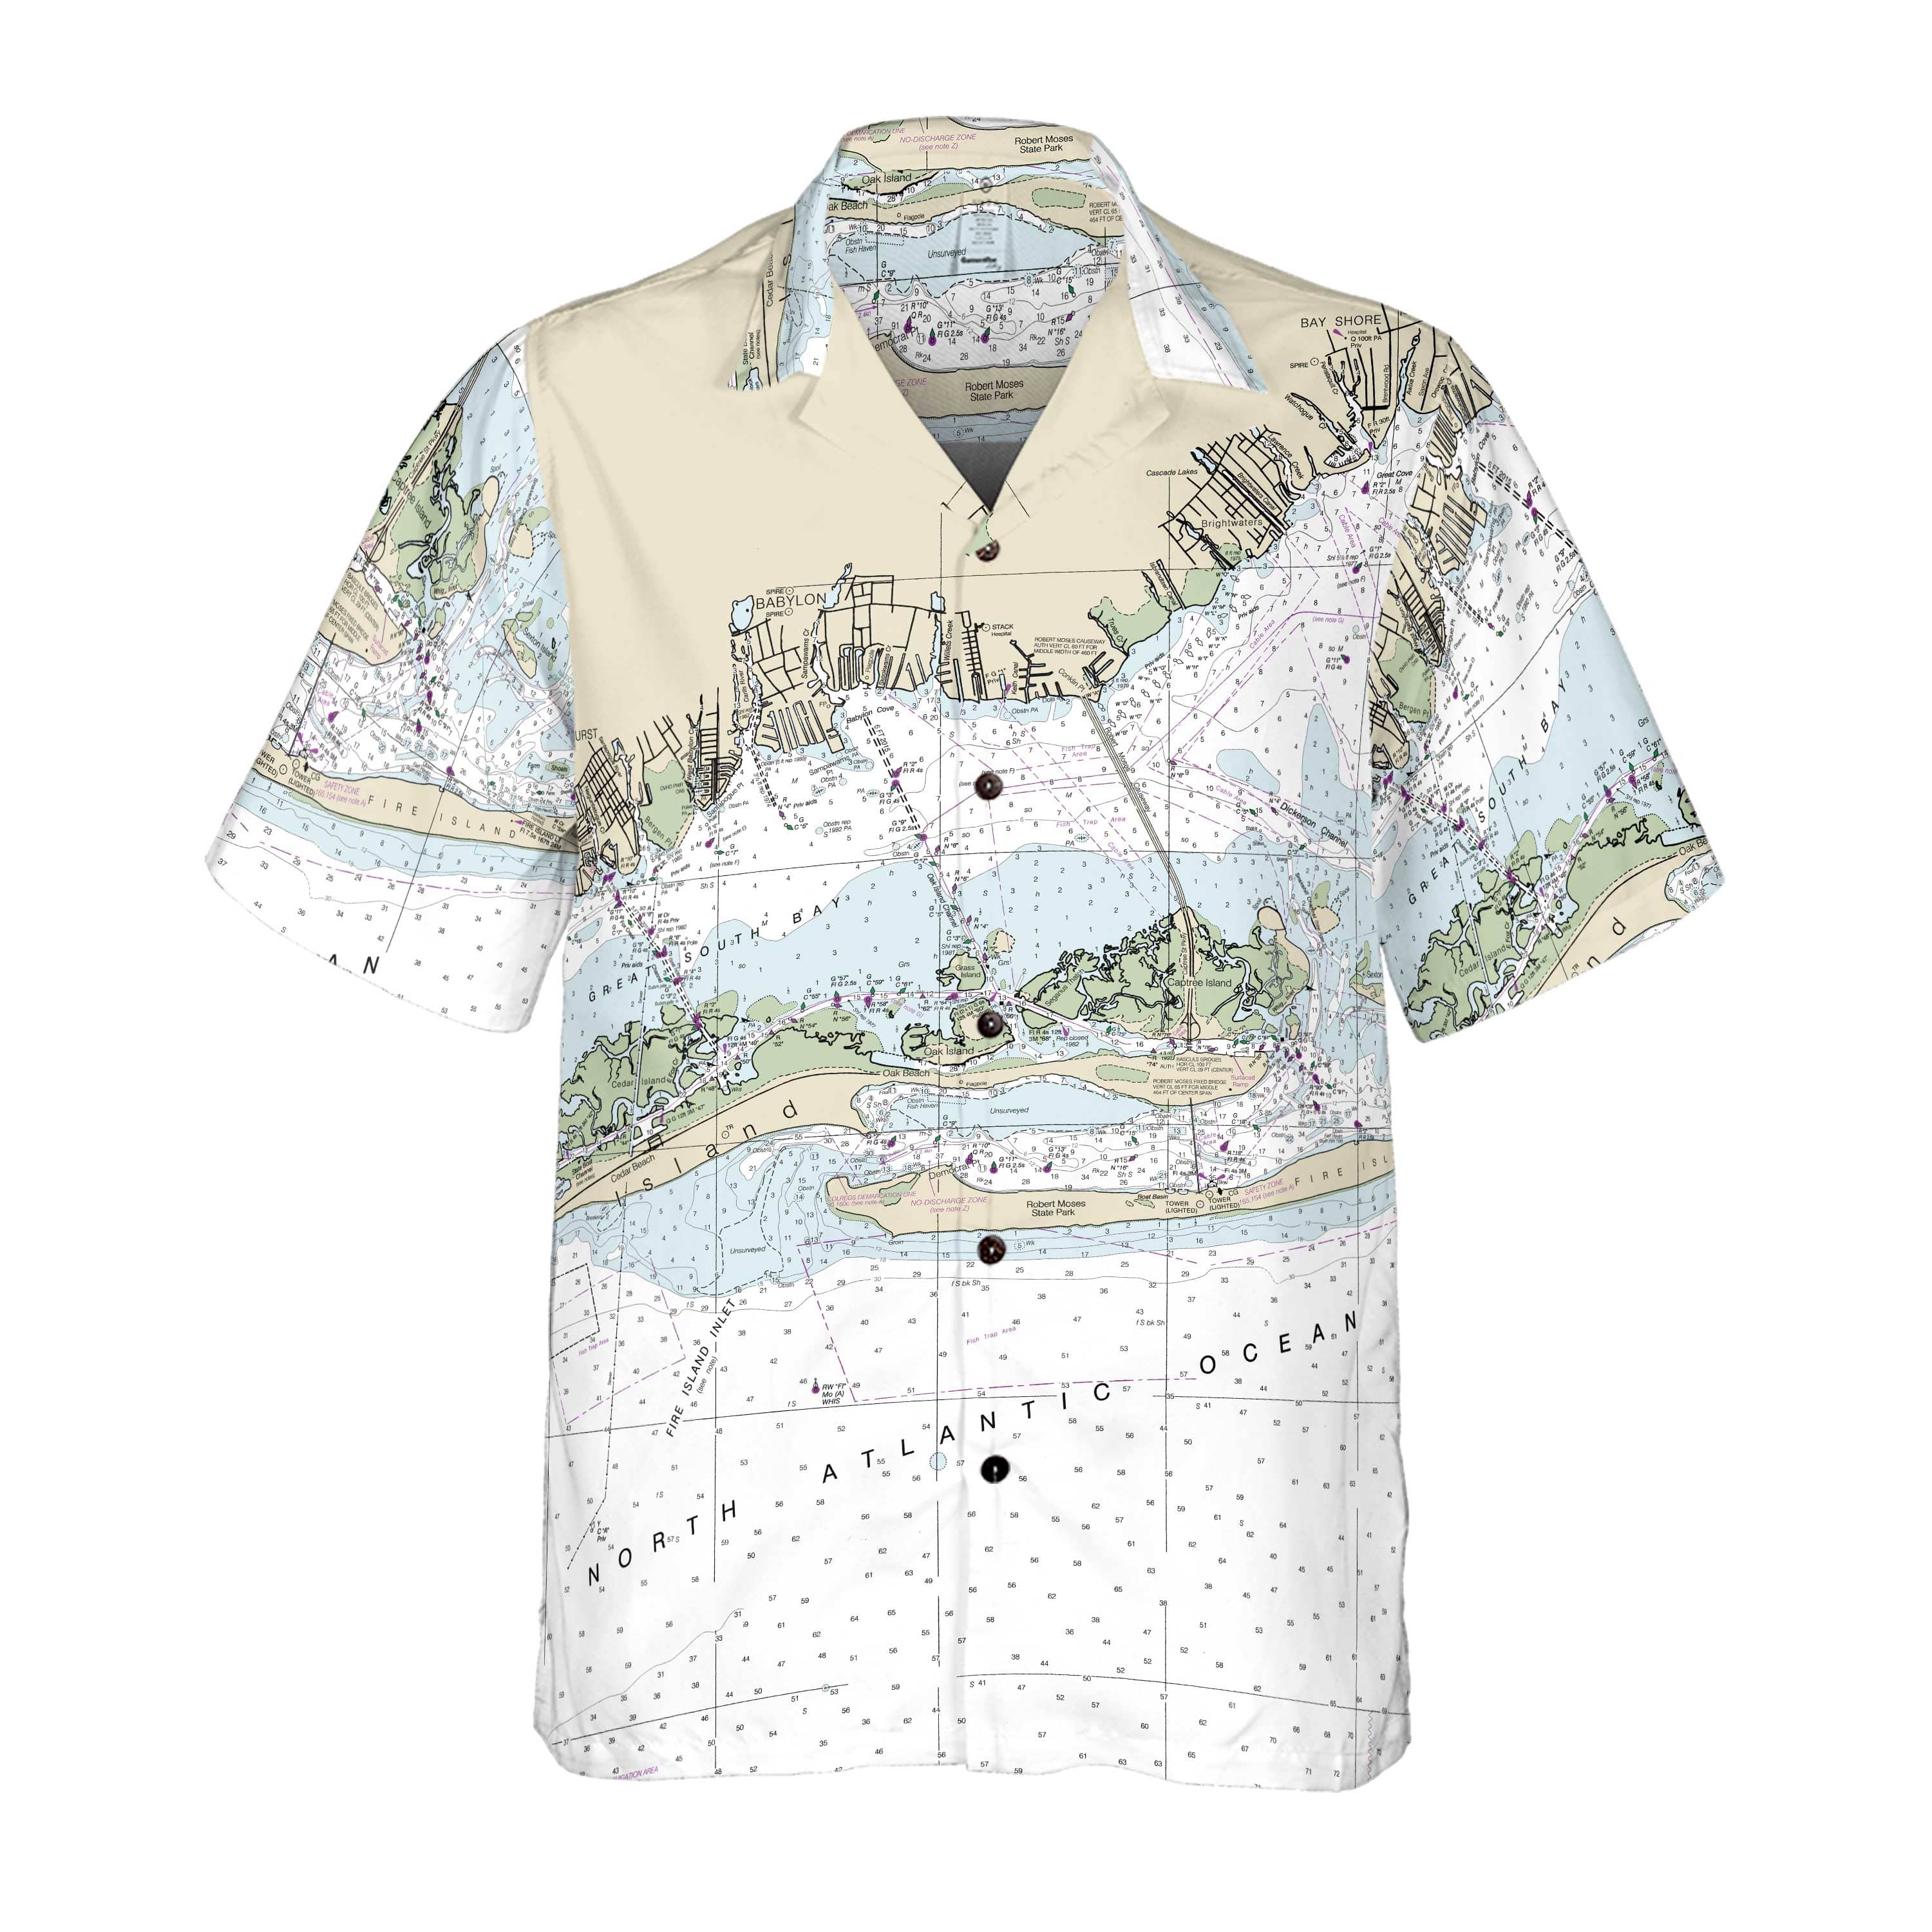 The Fire Island Inlet Coconut Button Camp Shirt